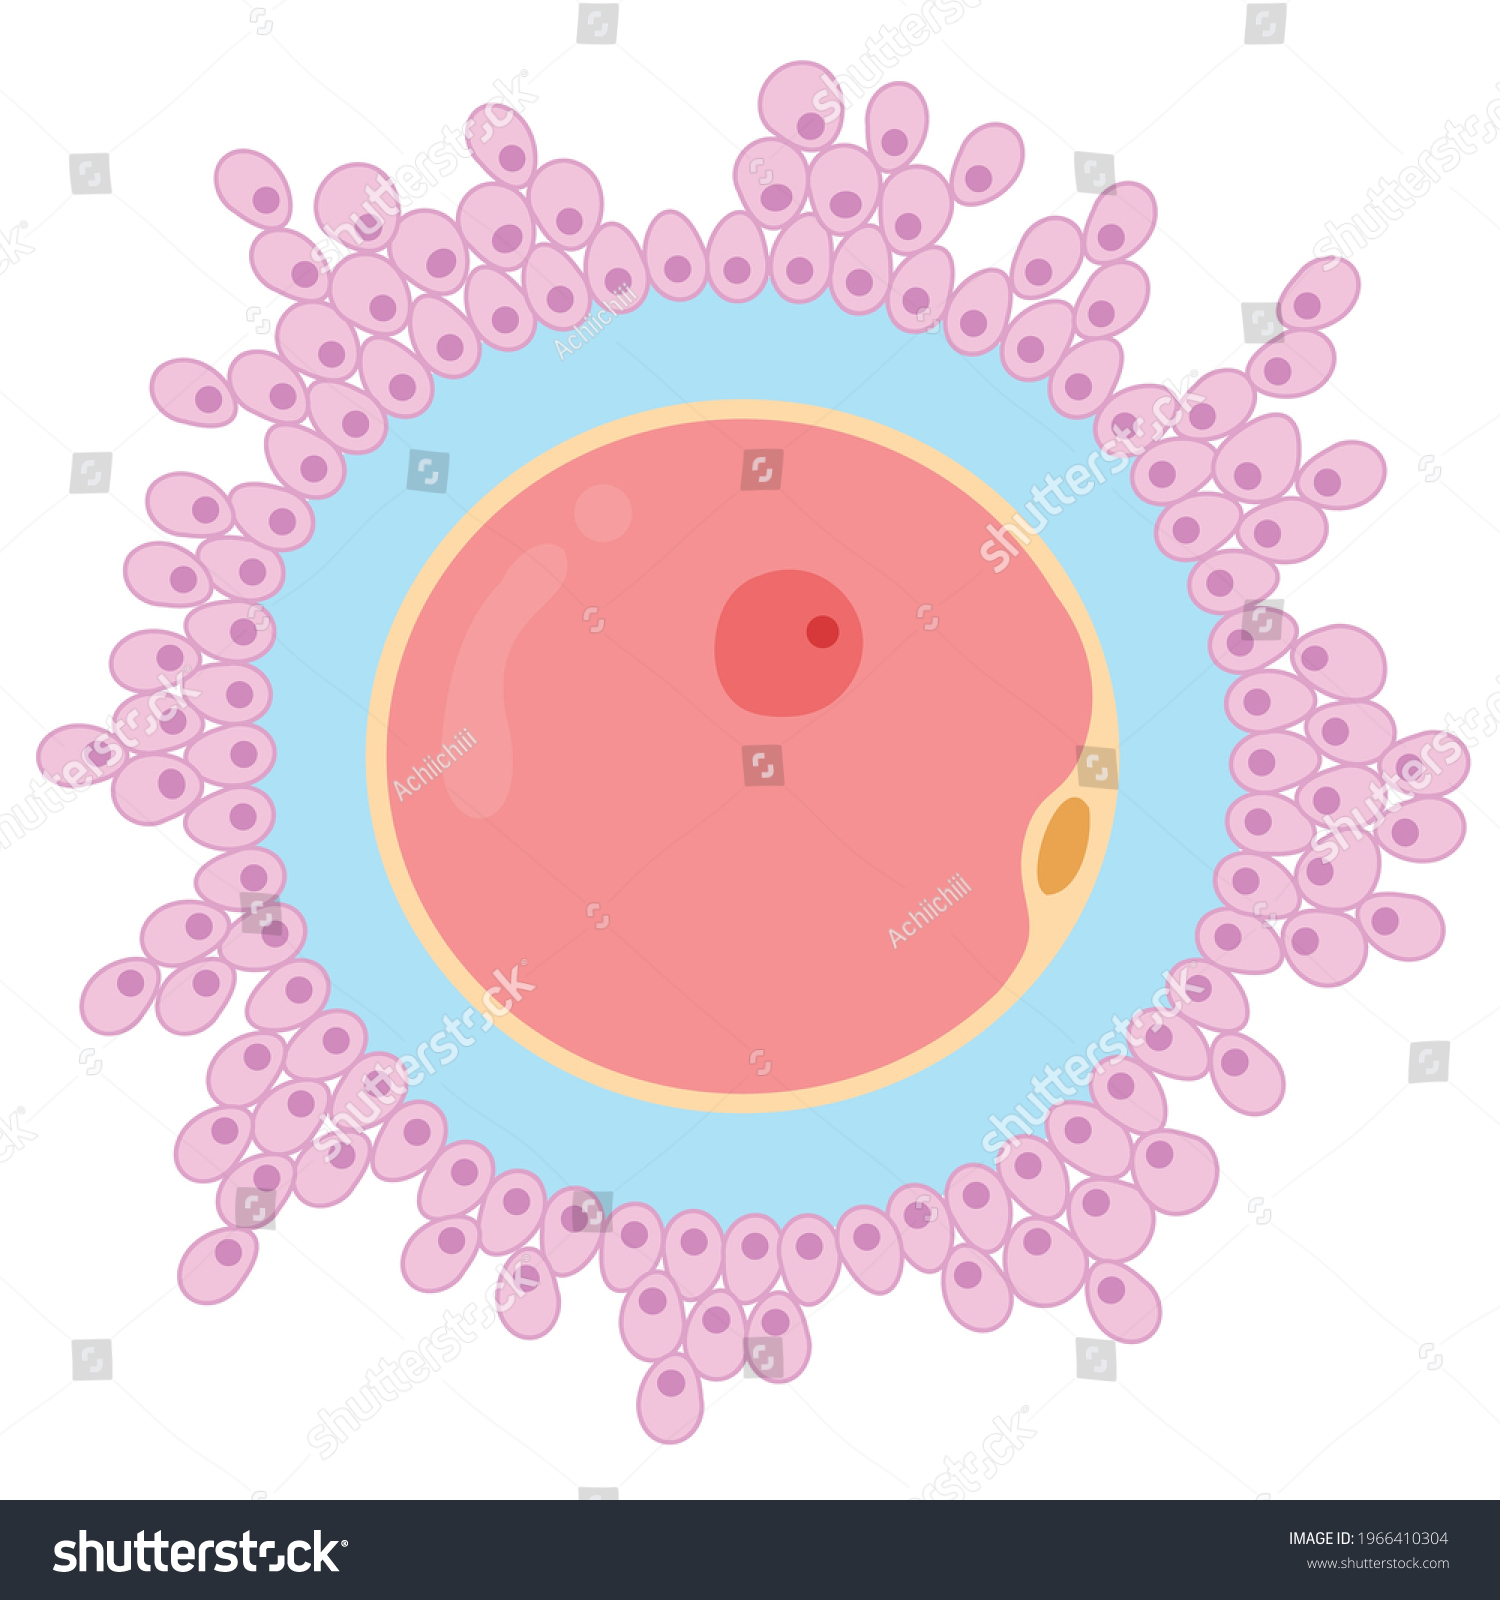 Egg Cell Ovum Female Reproductive Cell Stock Vector Royalty Free 1966410304 